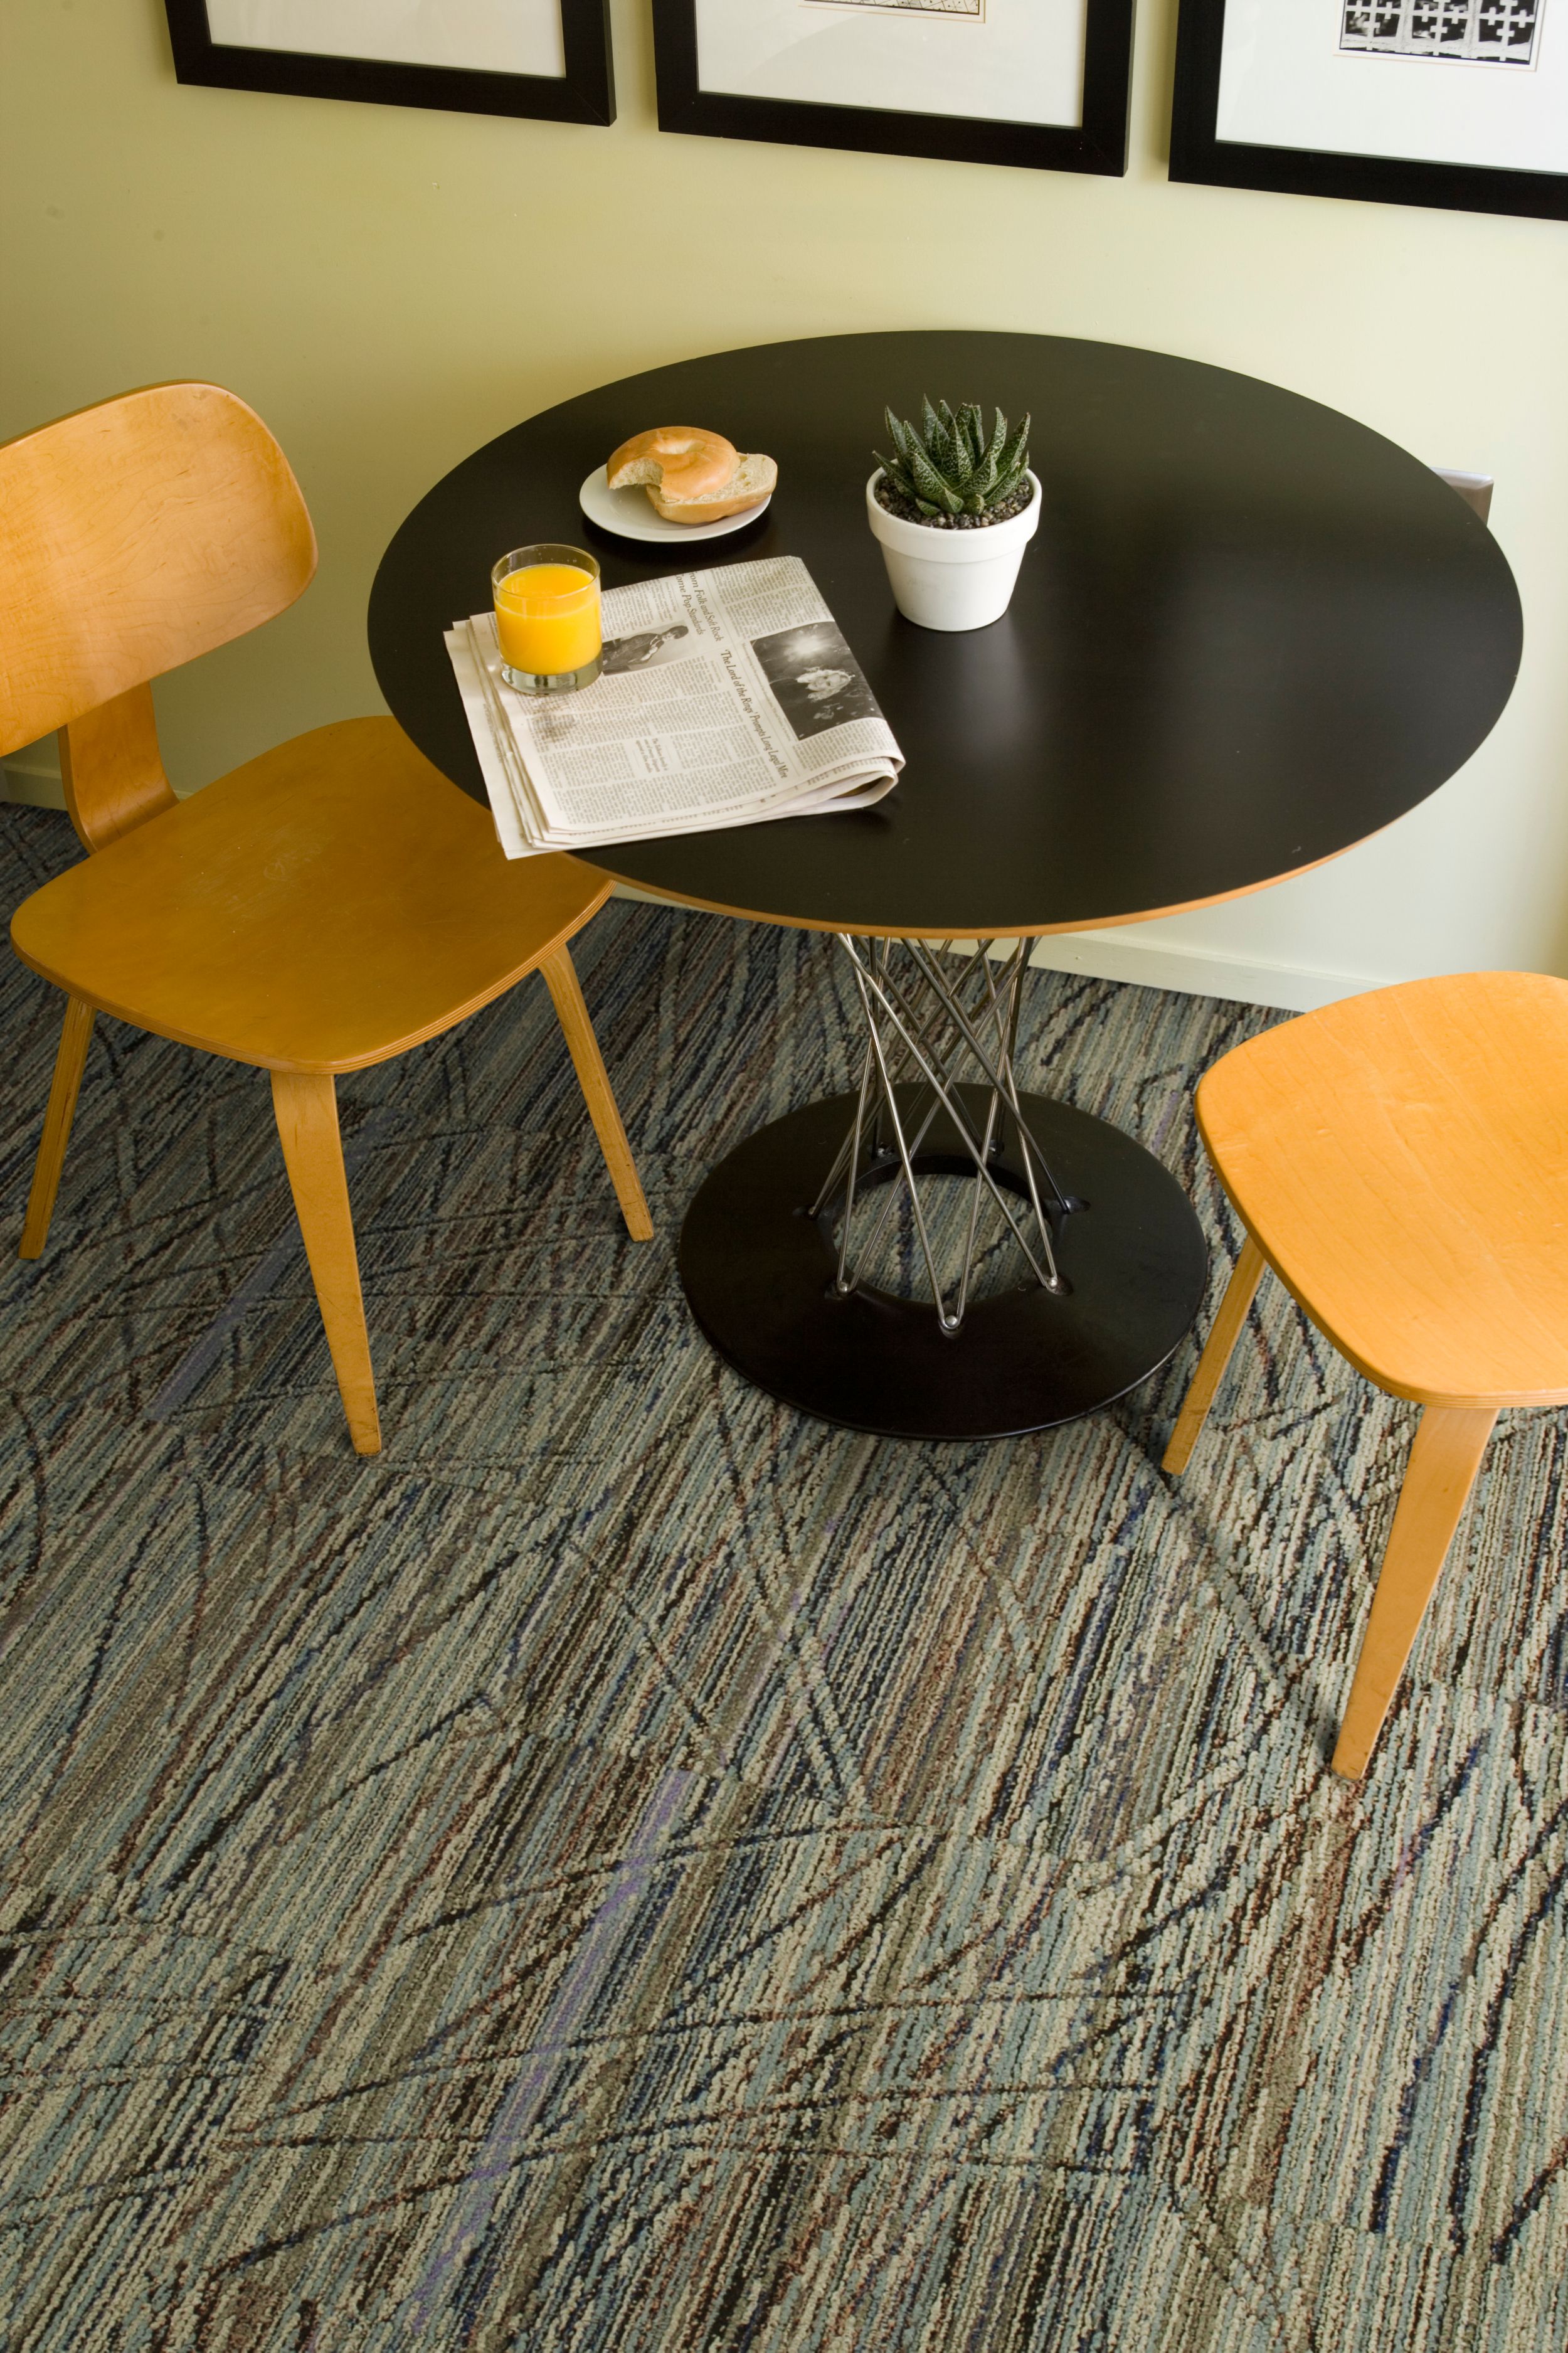 Detail of Interface Prairie Grass carpet tile in break area with table and two chairs imagen número 9